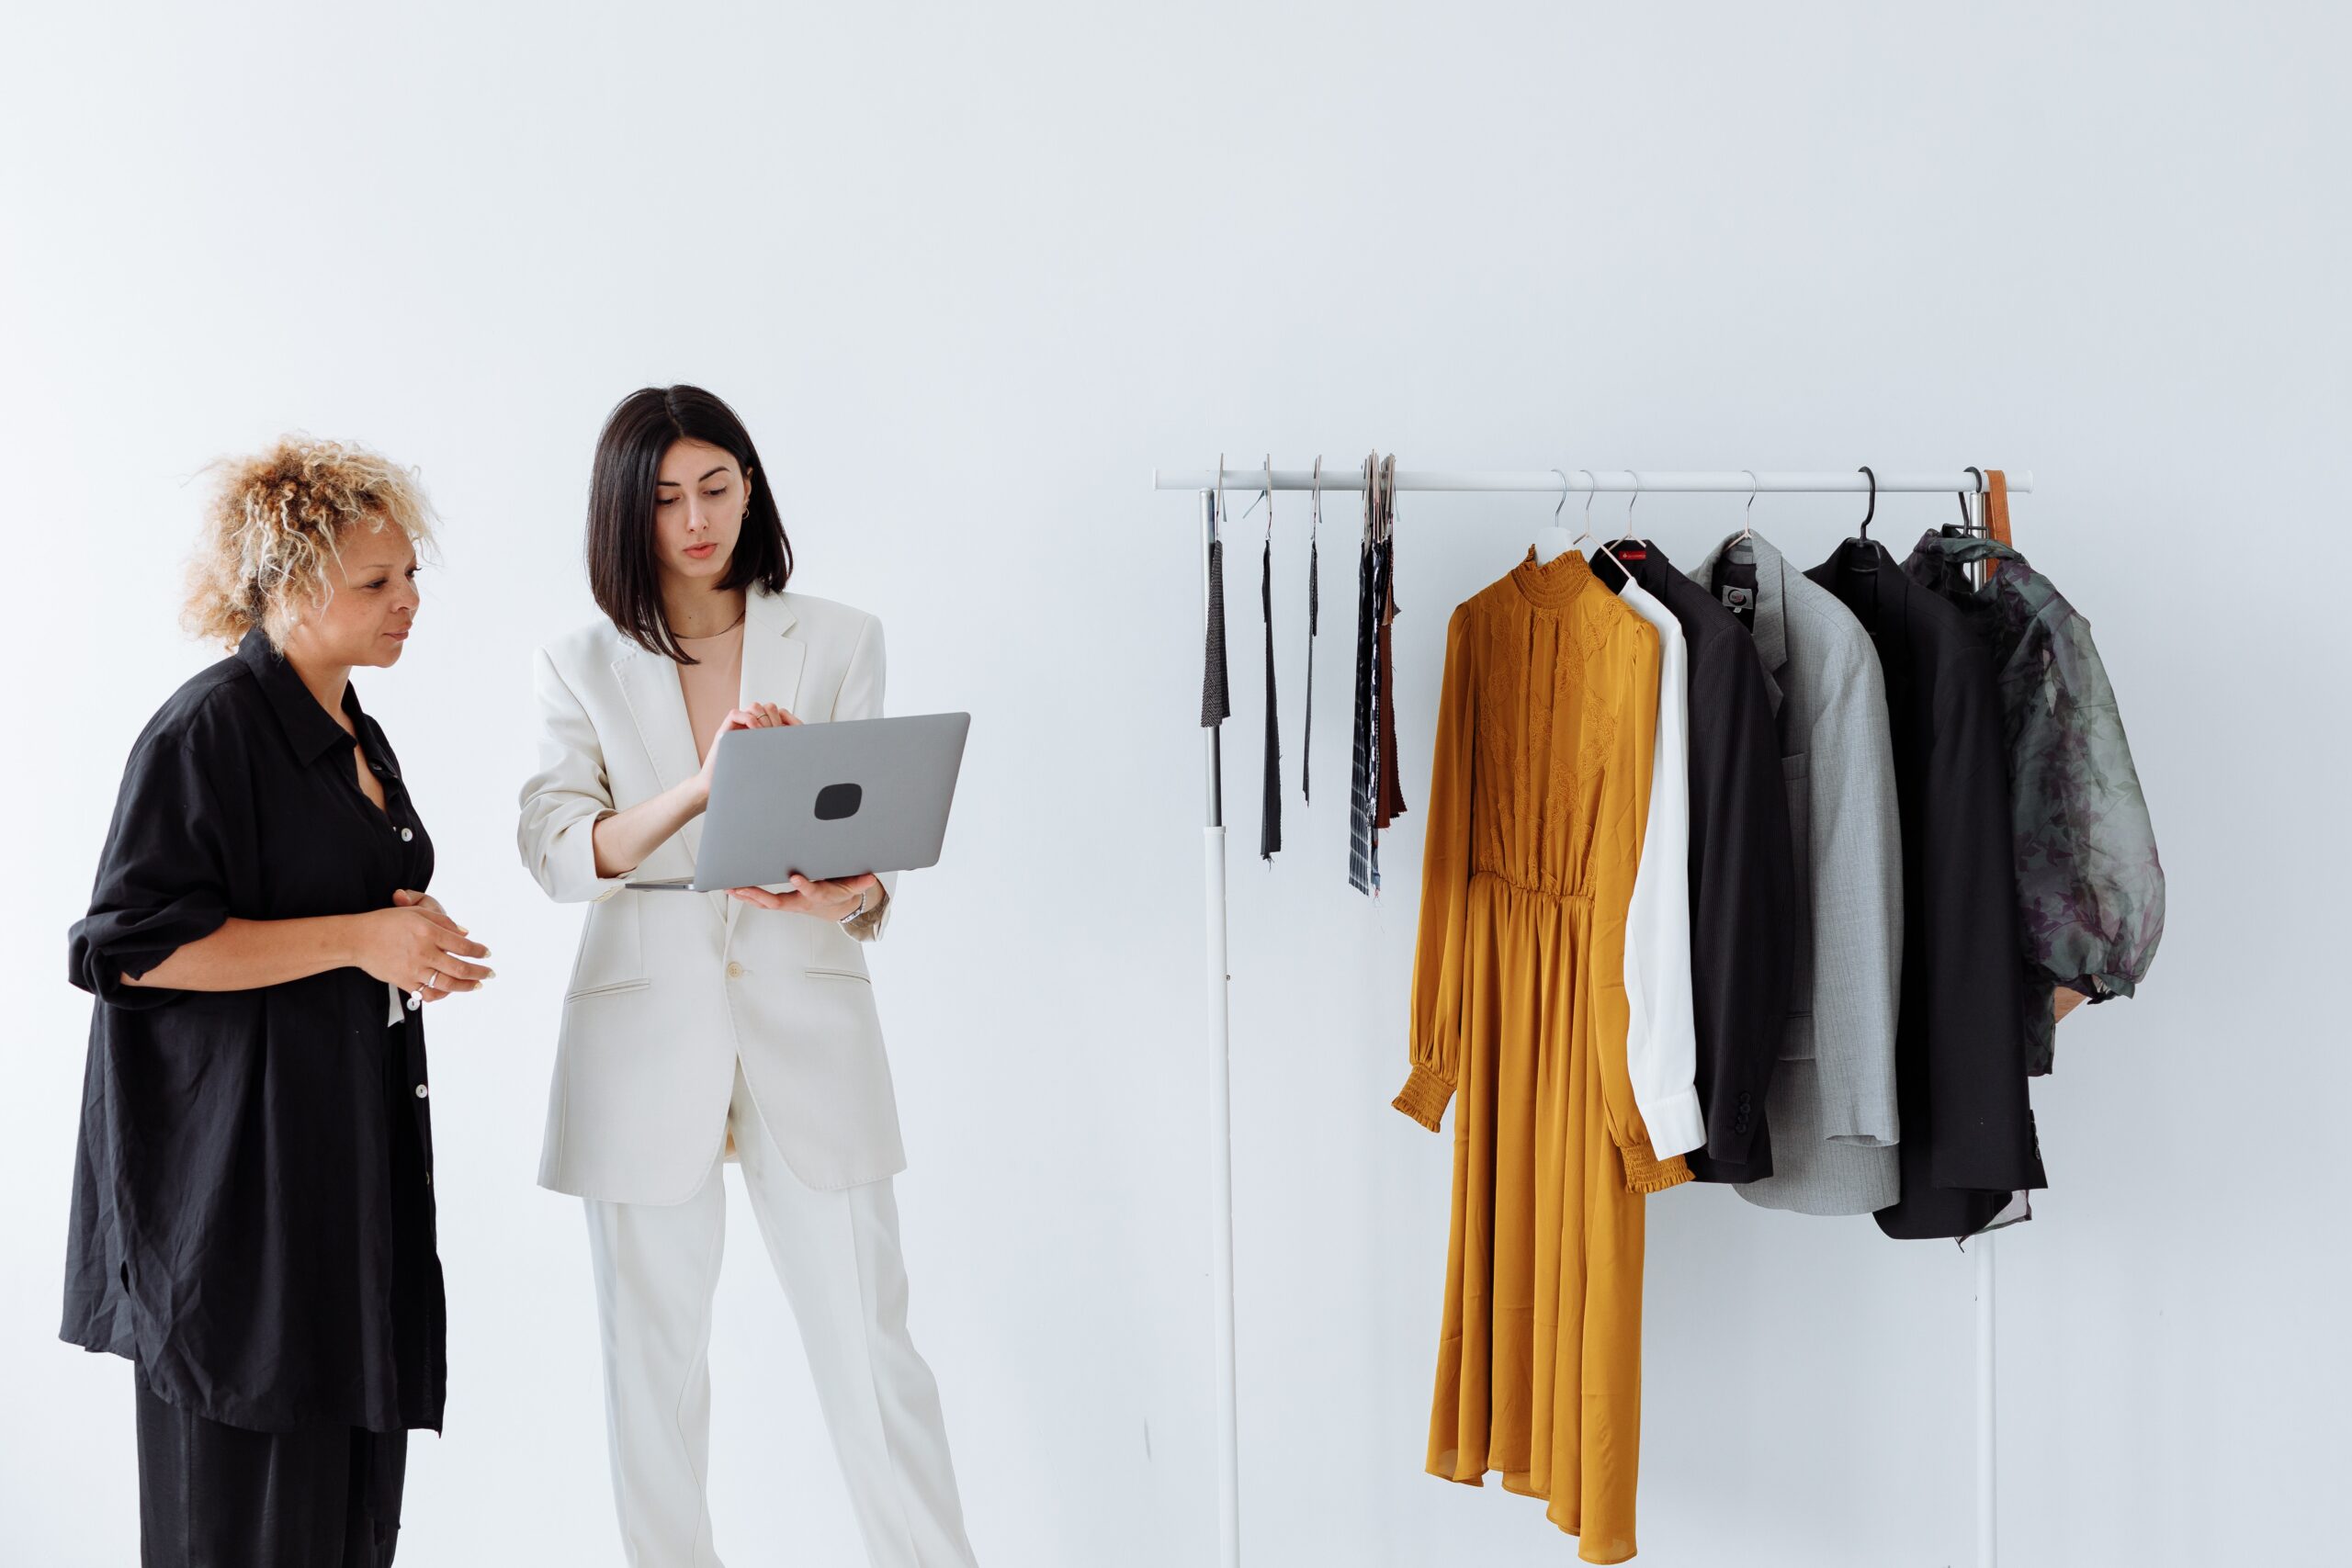 Two entrepreneurs in a modern fashion studio, one holding a laptop, discussing strategies for Brand Desire Mastery in Social Media, beside a rack of stylish clothing.